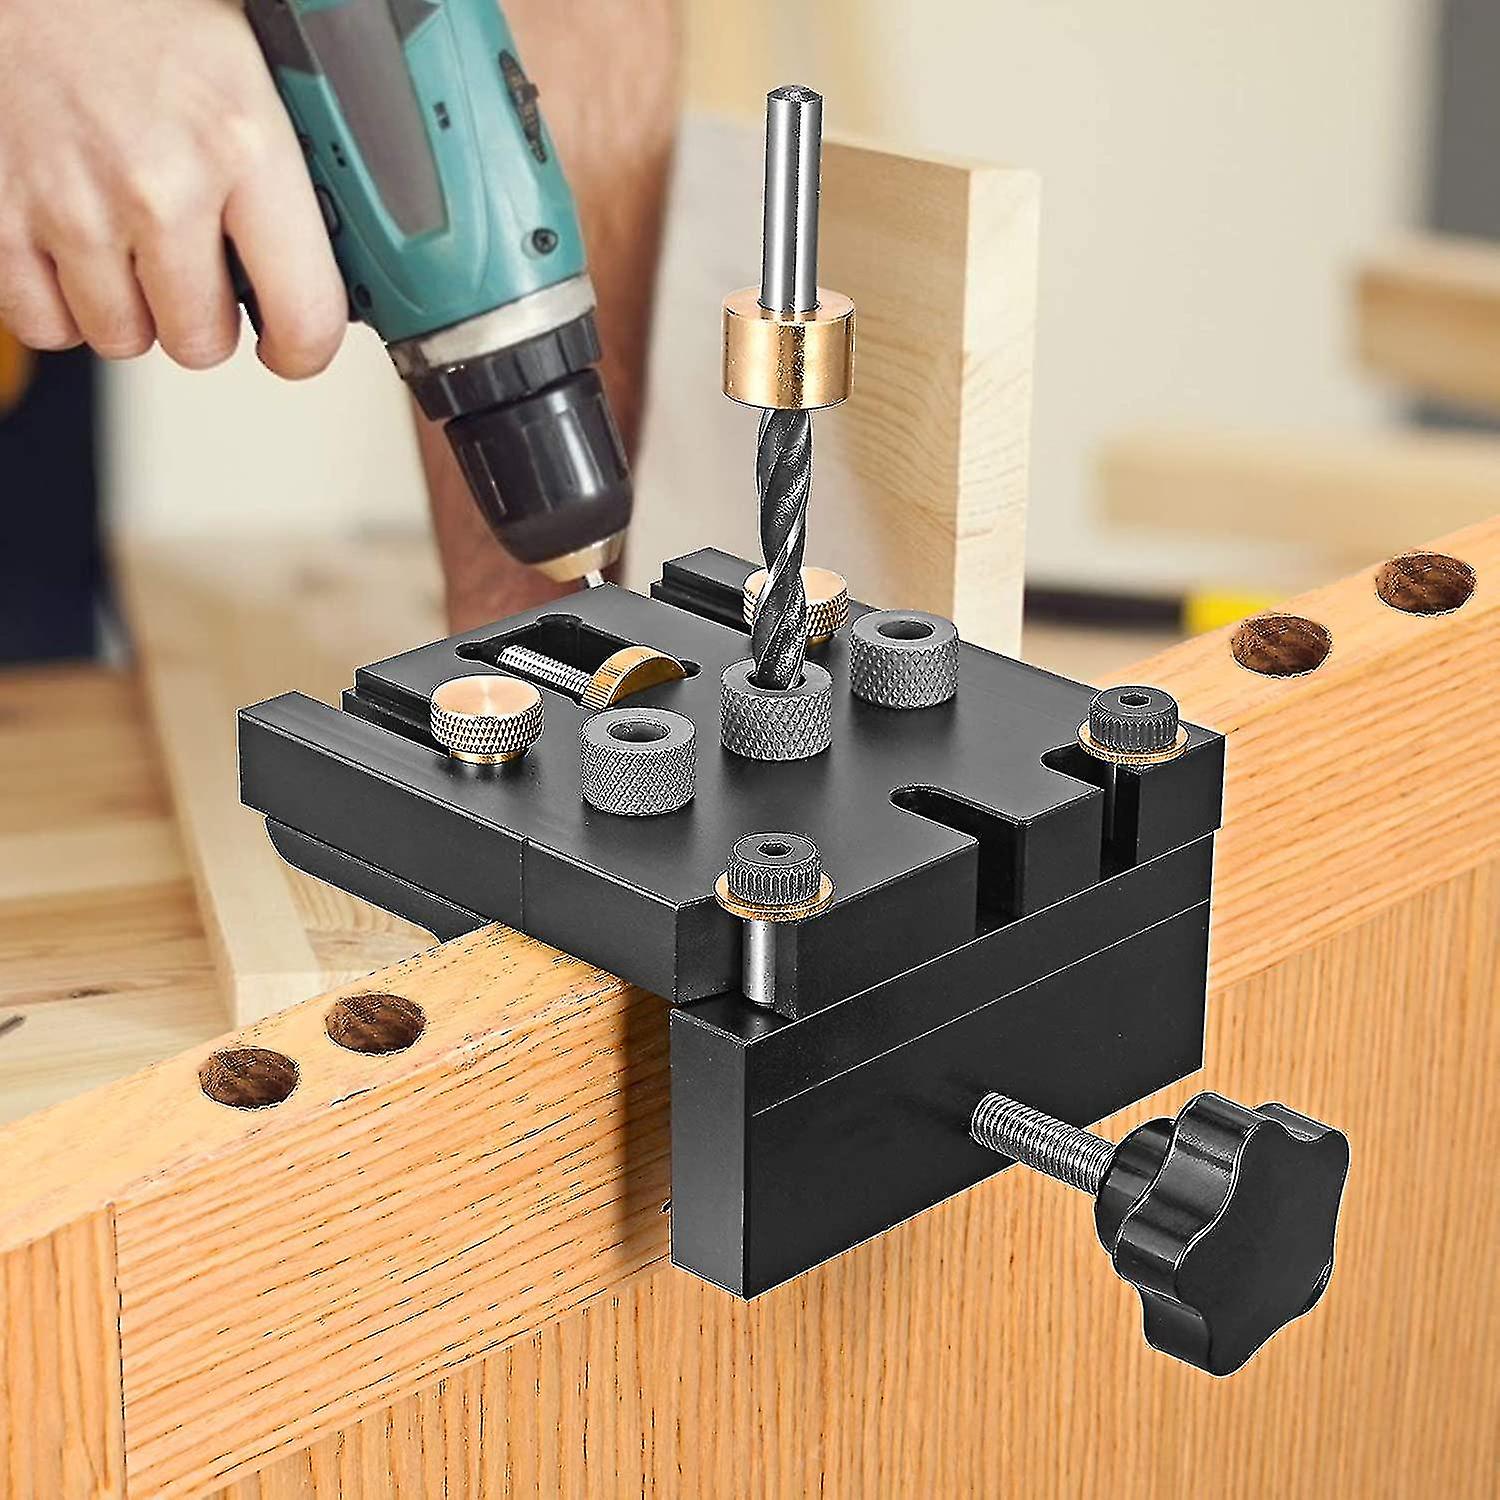 Guide Kit， 6/8/10/15mm Hole Punch Locator 3 In 1 Drilling Hole Positioners Pocket Hole Jig Kit Tool